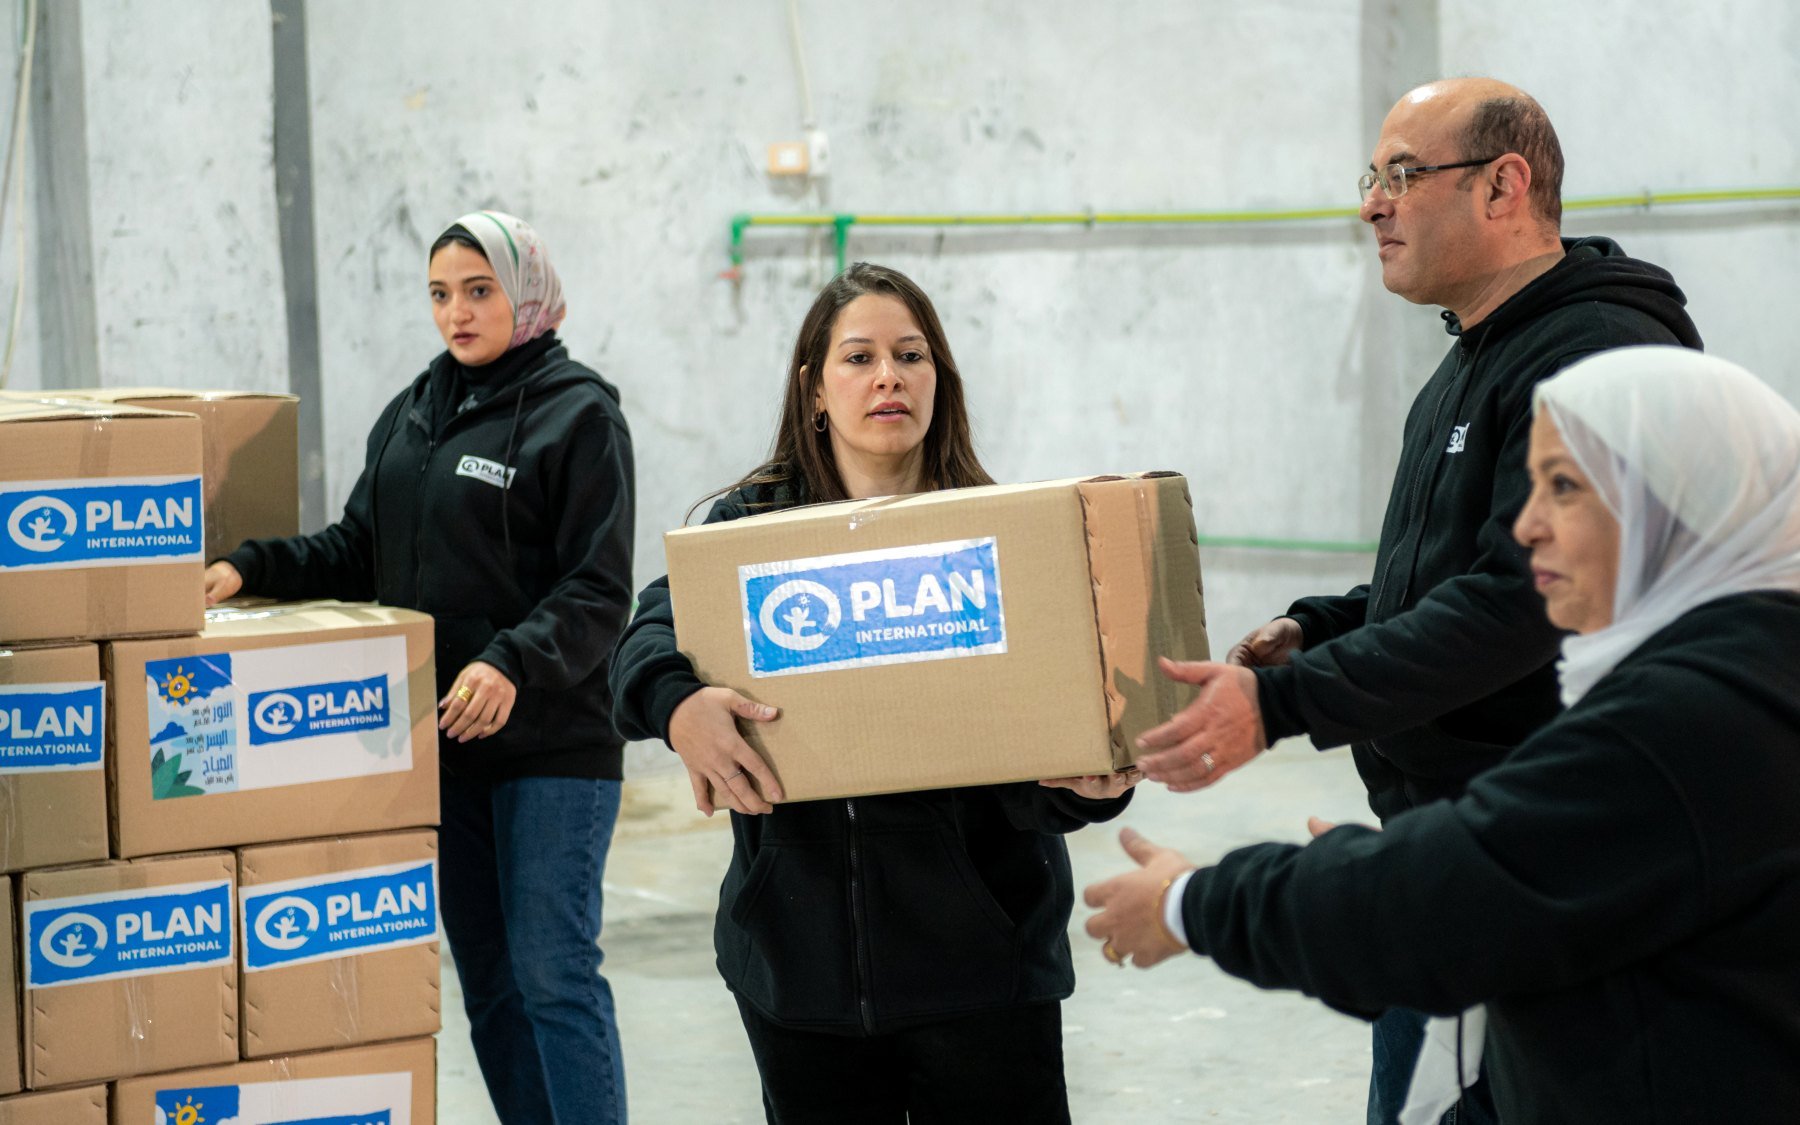 Plan staff in Egypt prepare boxes of first aid kits ready for transport to Gaza (2)